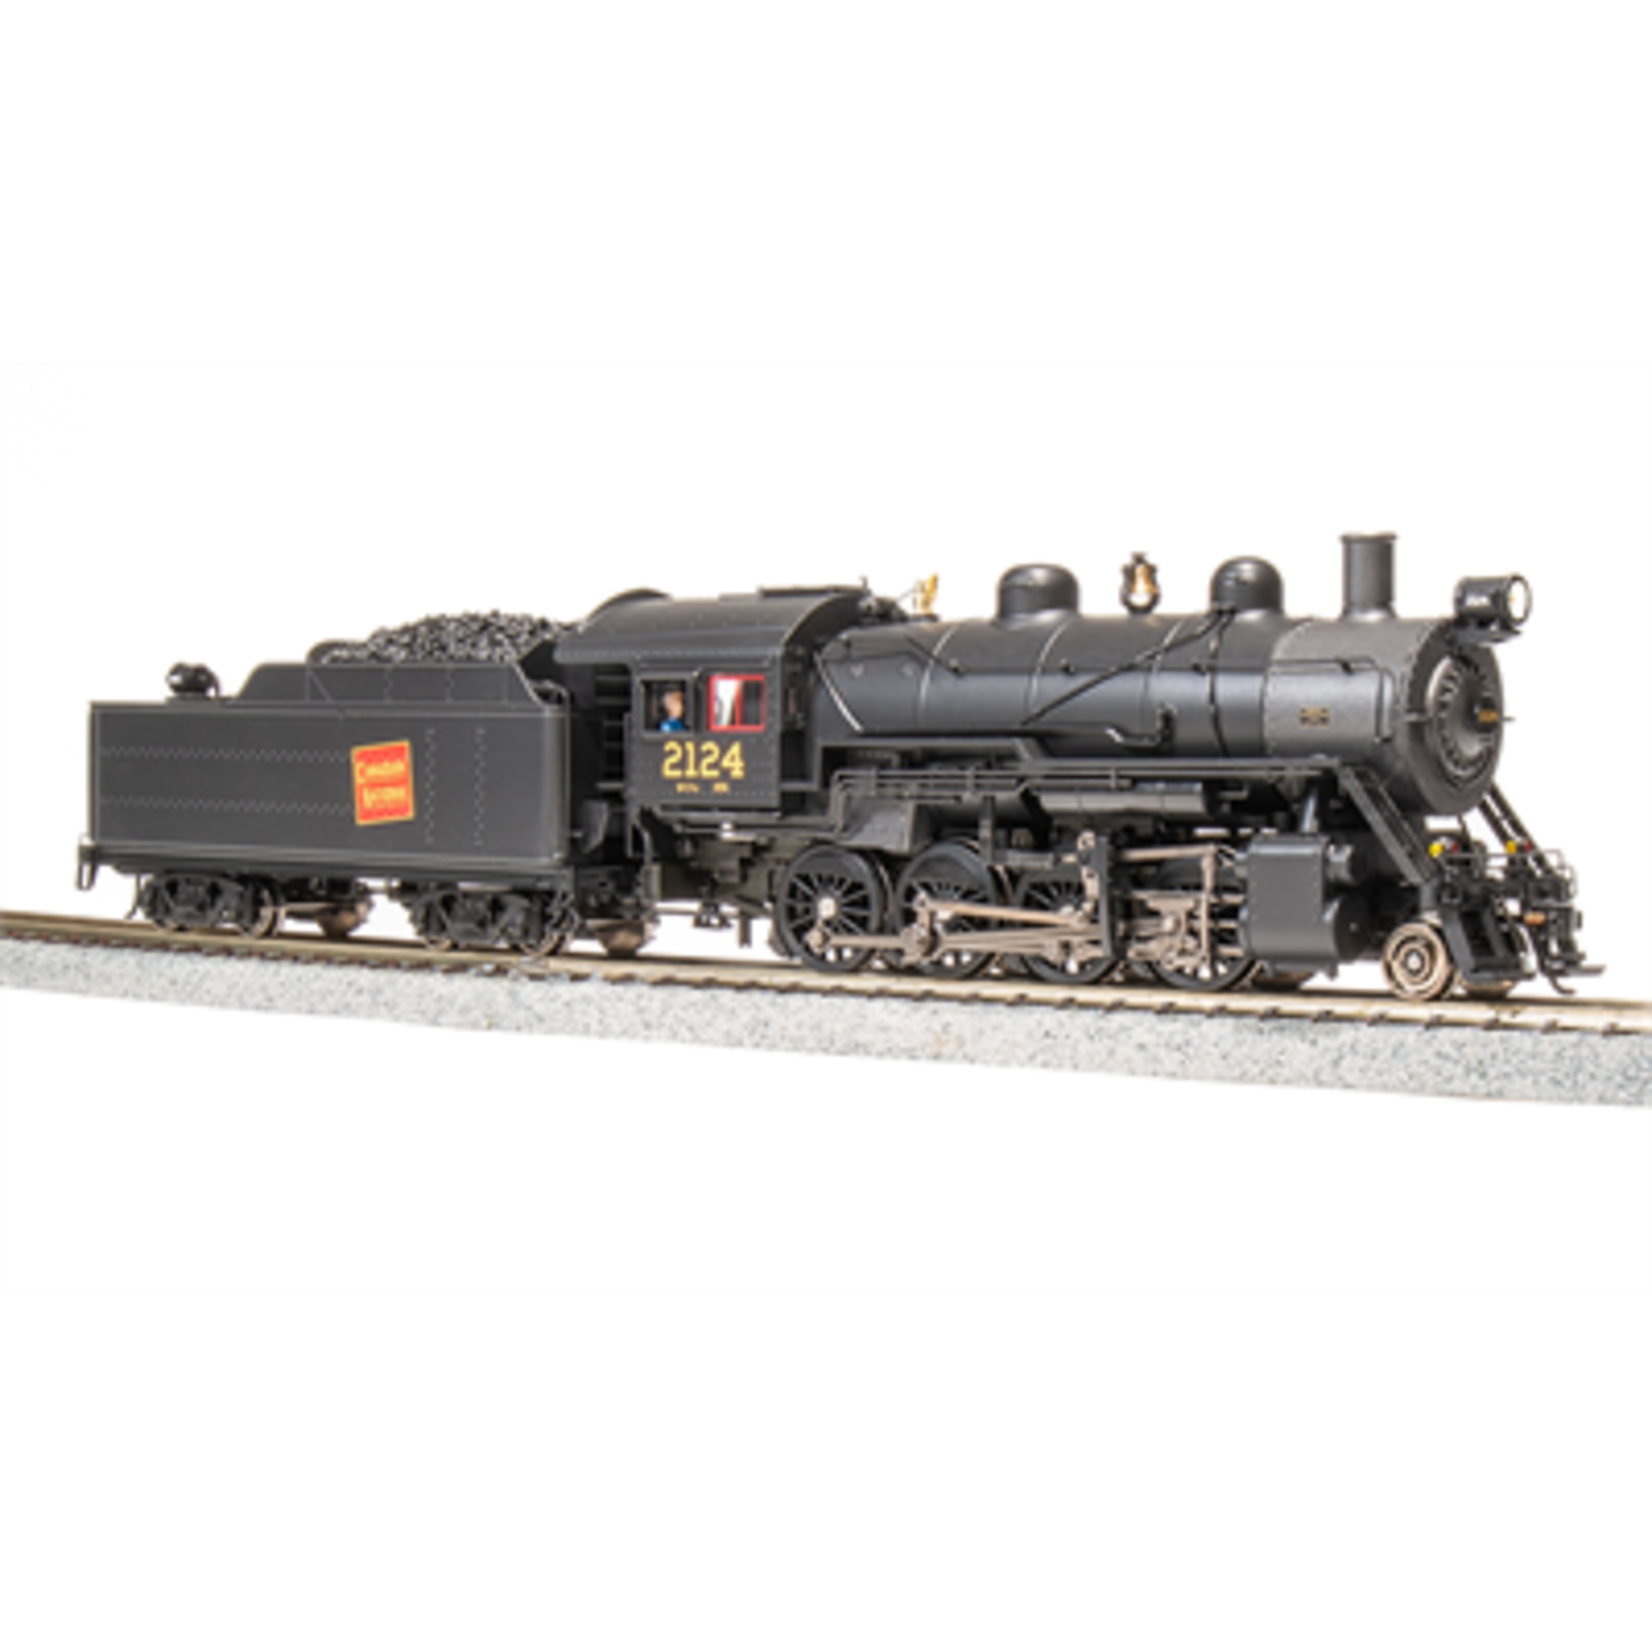 Broadway Limited HO Loco, 2-8-0 Consolidation, Prgn4, CN 2124 - Clearance